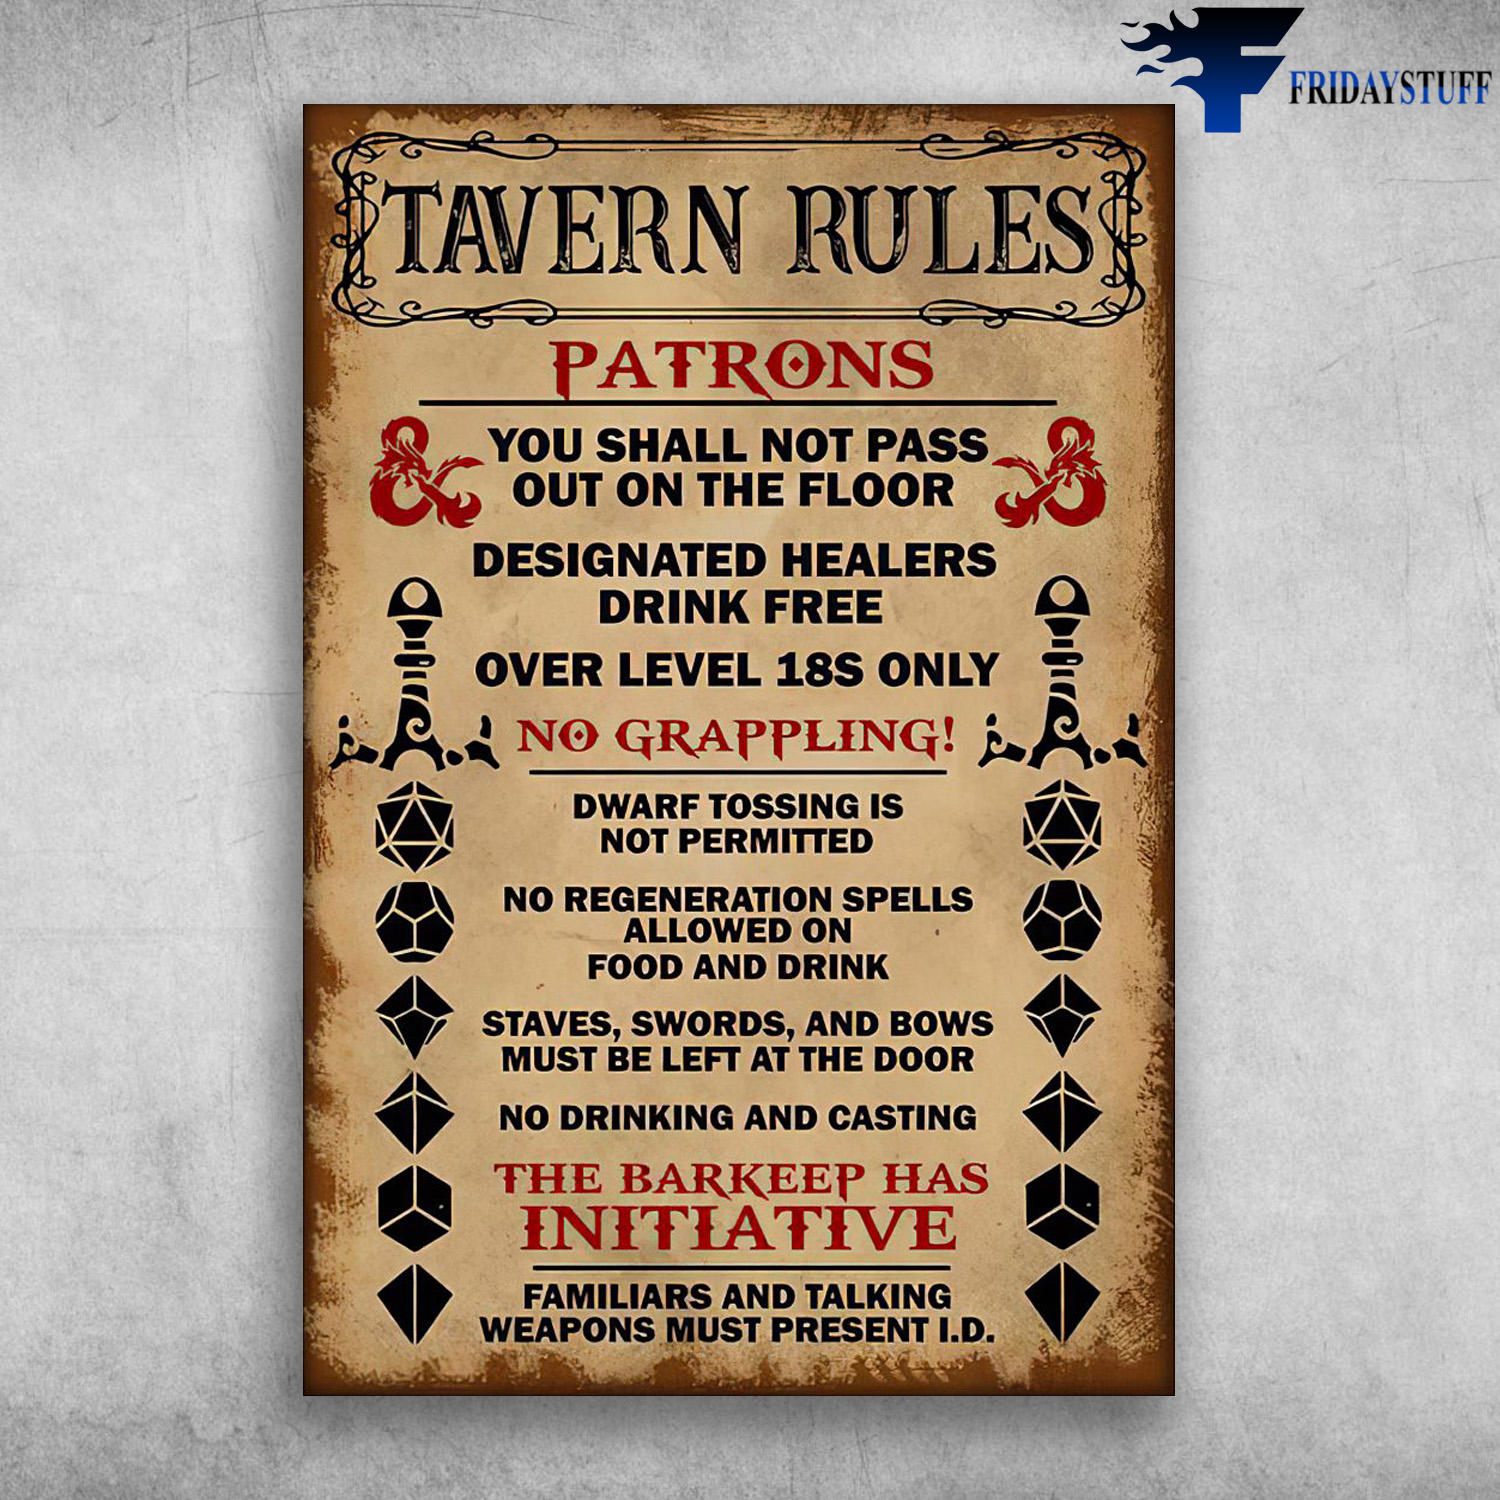 Tavern Rules - Patrons, You Shall Not Pass Out On The Floor, Designated Healers, Drink Free, Over Level. 18s Only, No Grappling,DwarfTossing Is Not Permitted, No Regeneration Spells Allowed On Food And Drink, The Barkeep Has Initiative